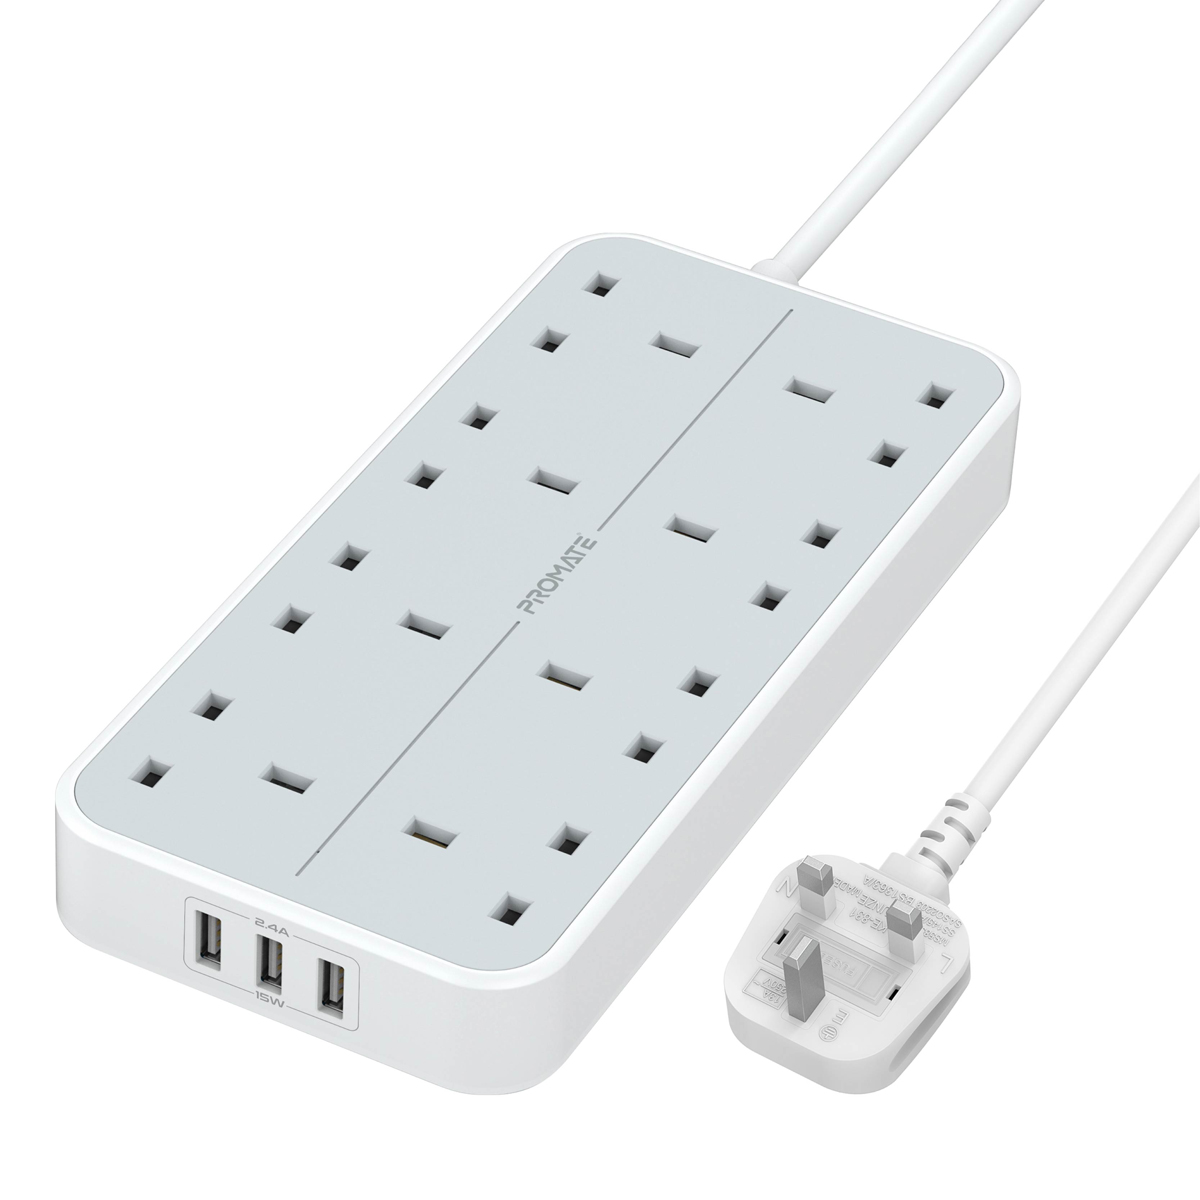 Promate Power Strip, Heavy-Duty 11-in-1 Surge Protector Power Extension with Massive 3250W 8 AC Outlets, 3 USB Intellicharge Ports and 4M Cord Length for iPhone12/TV/Fridge/Office, PowerCord8UK-4M